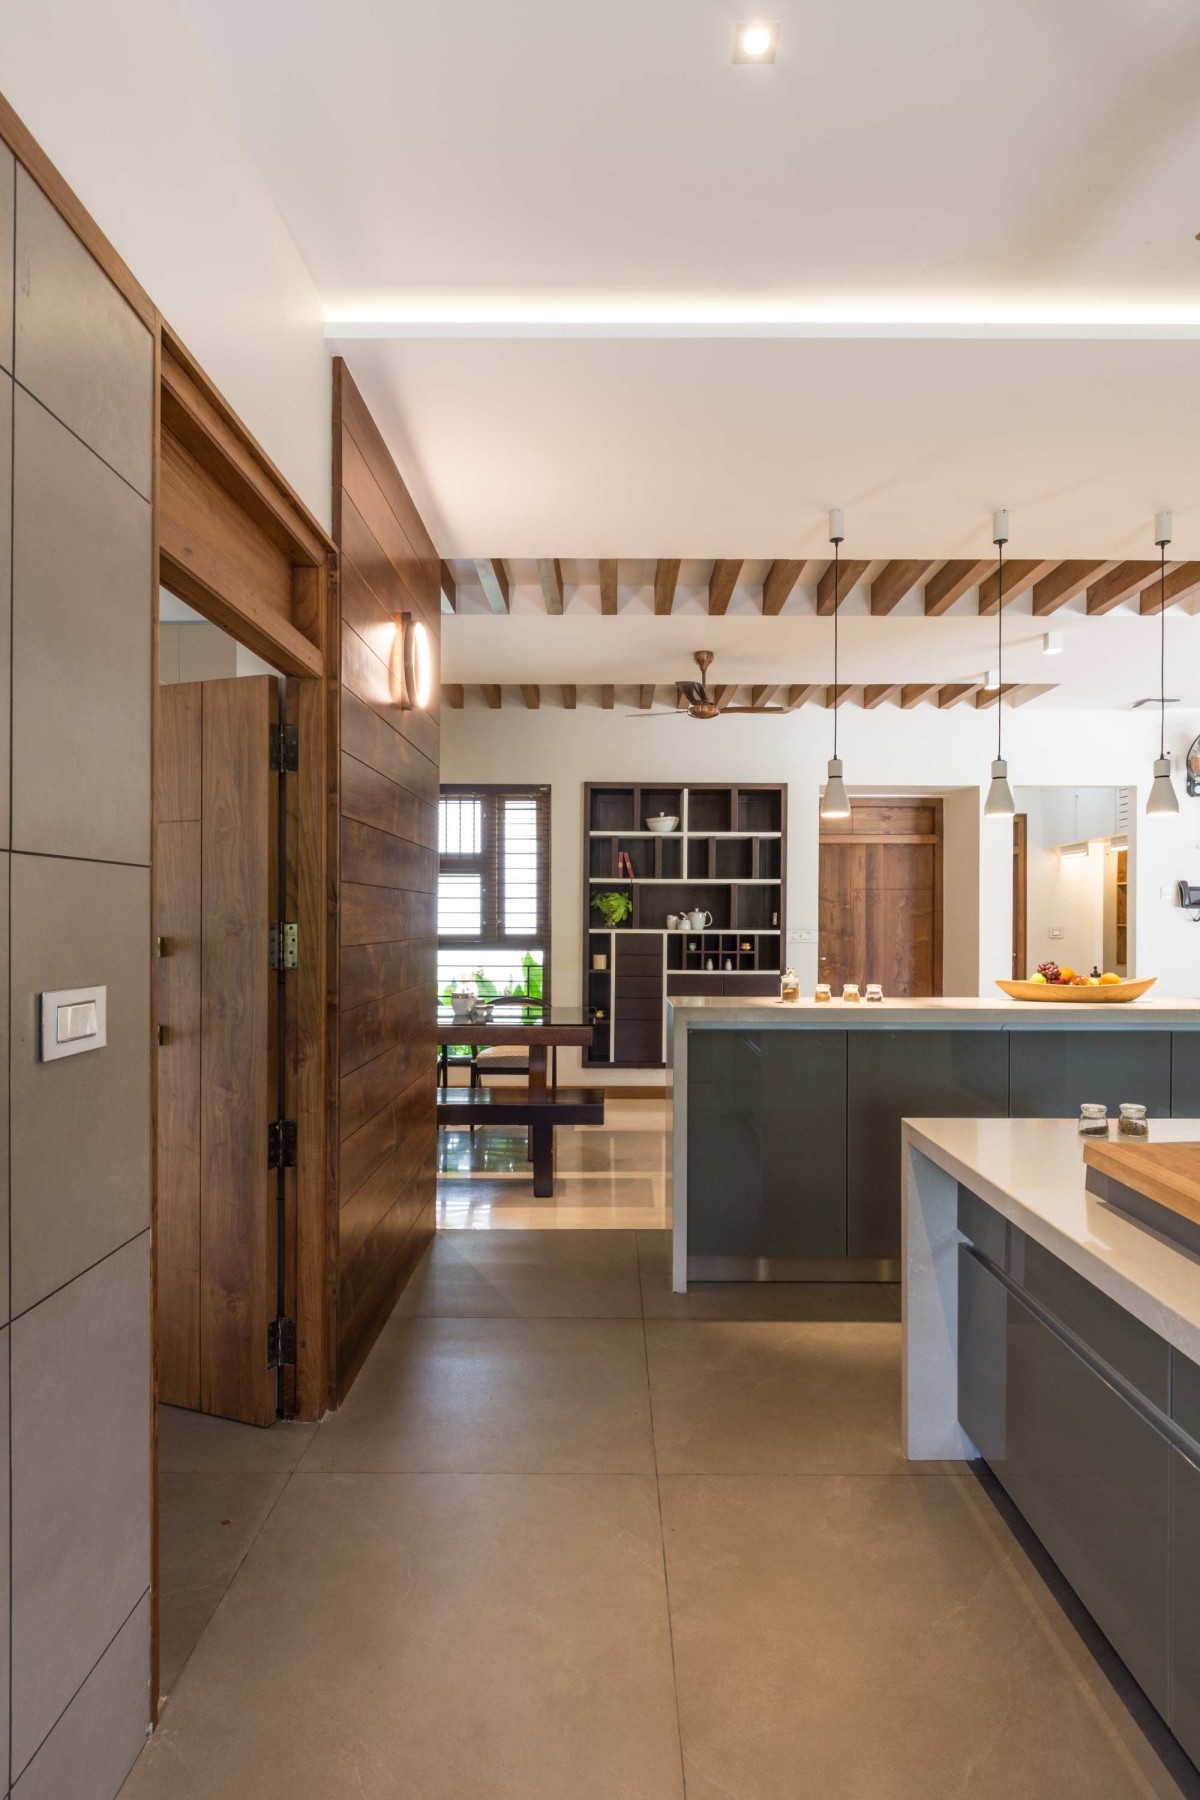 Kitchen of Lucid House by Attiks Architecture